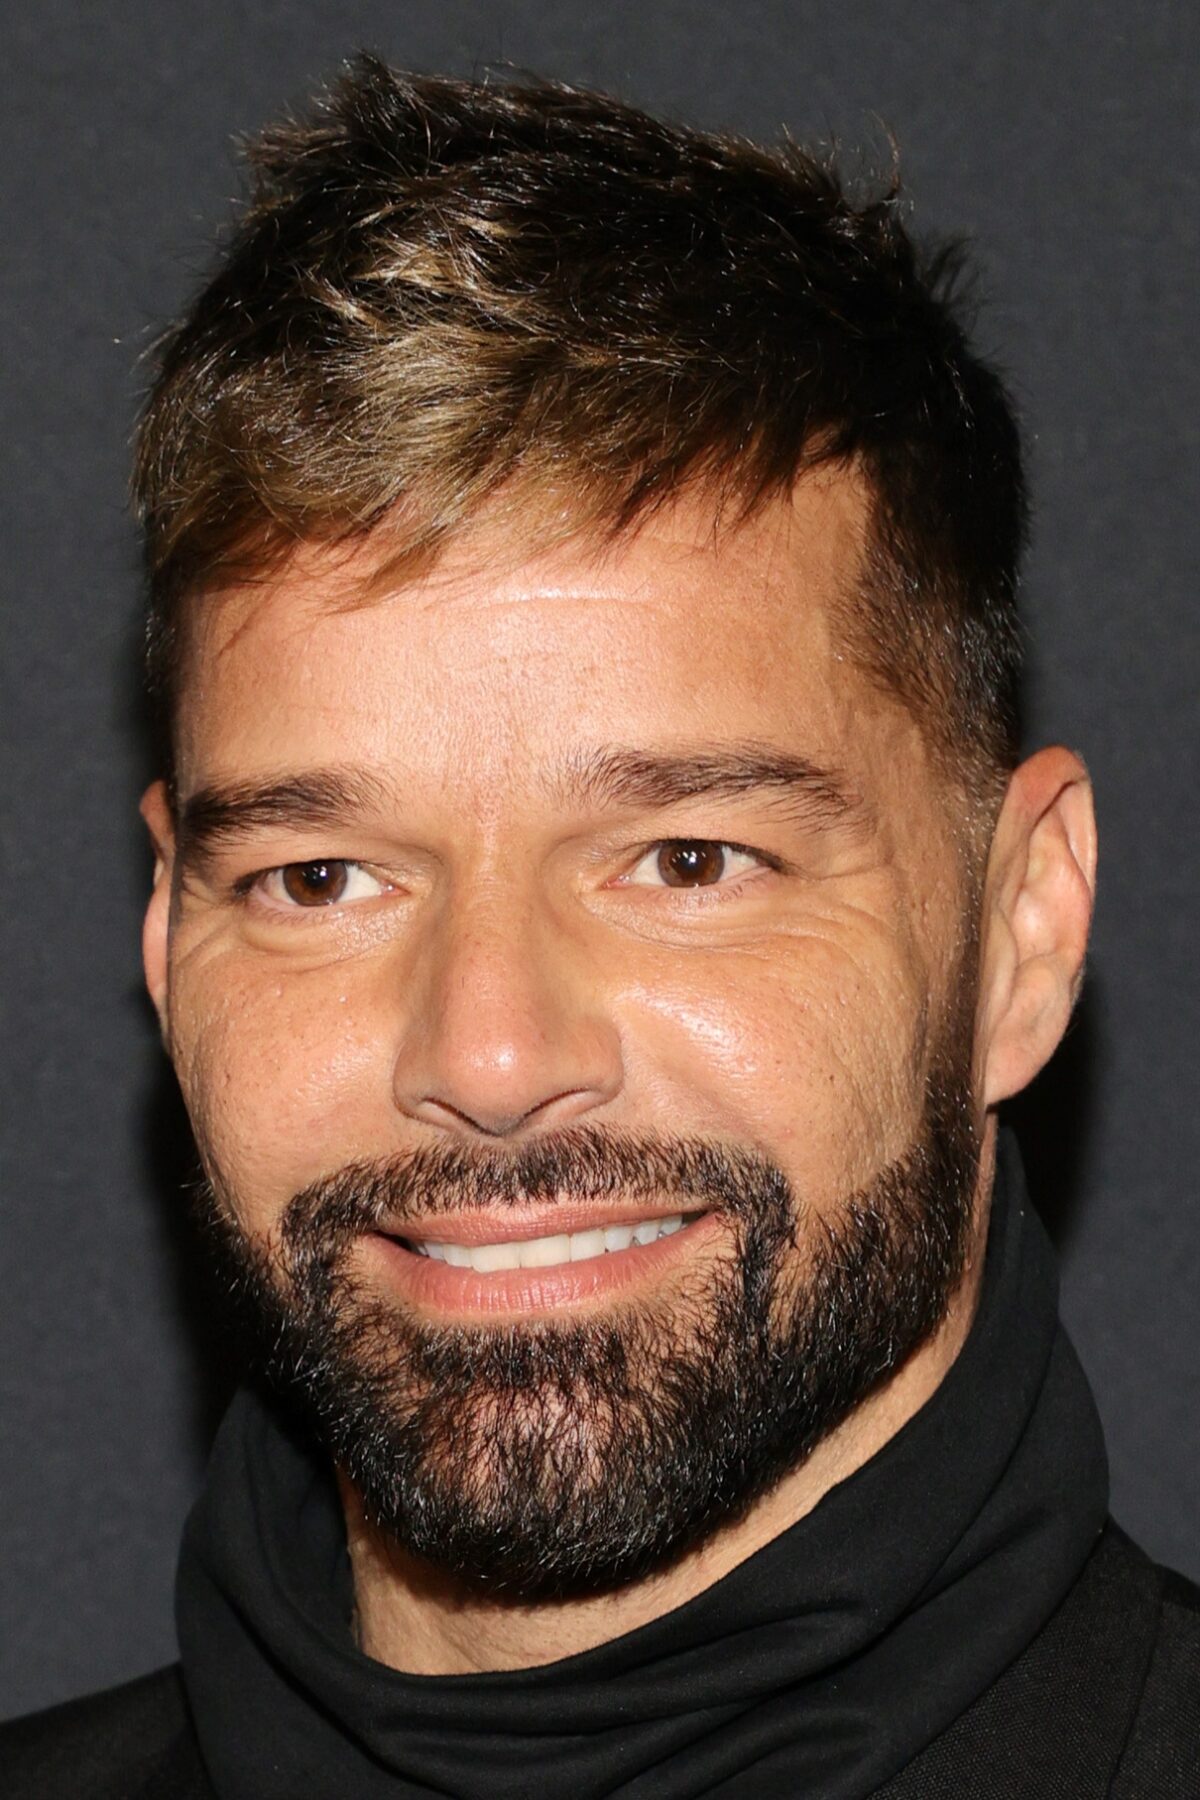 NEW YORK, NEW YORK - DECEMBER 14: Ricky Martin attends the Museum of Modern Art Film Benefit presented by CHANEL, a tribute to Penélope Cruz, at Museum of Modern Art on December 14, 2021 in New York City. (Photo by Jamie McCarthy/WireImage )